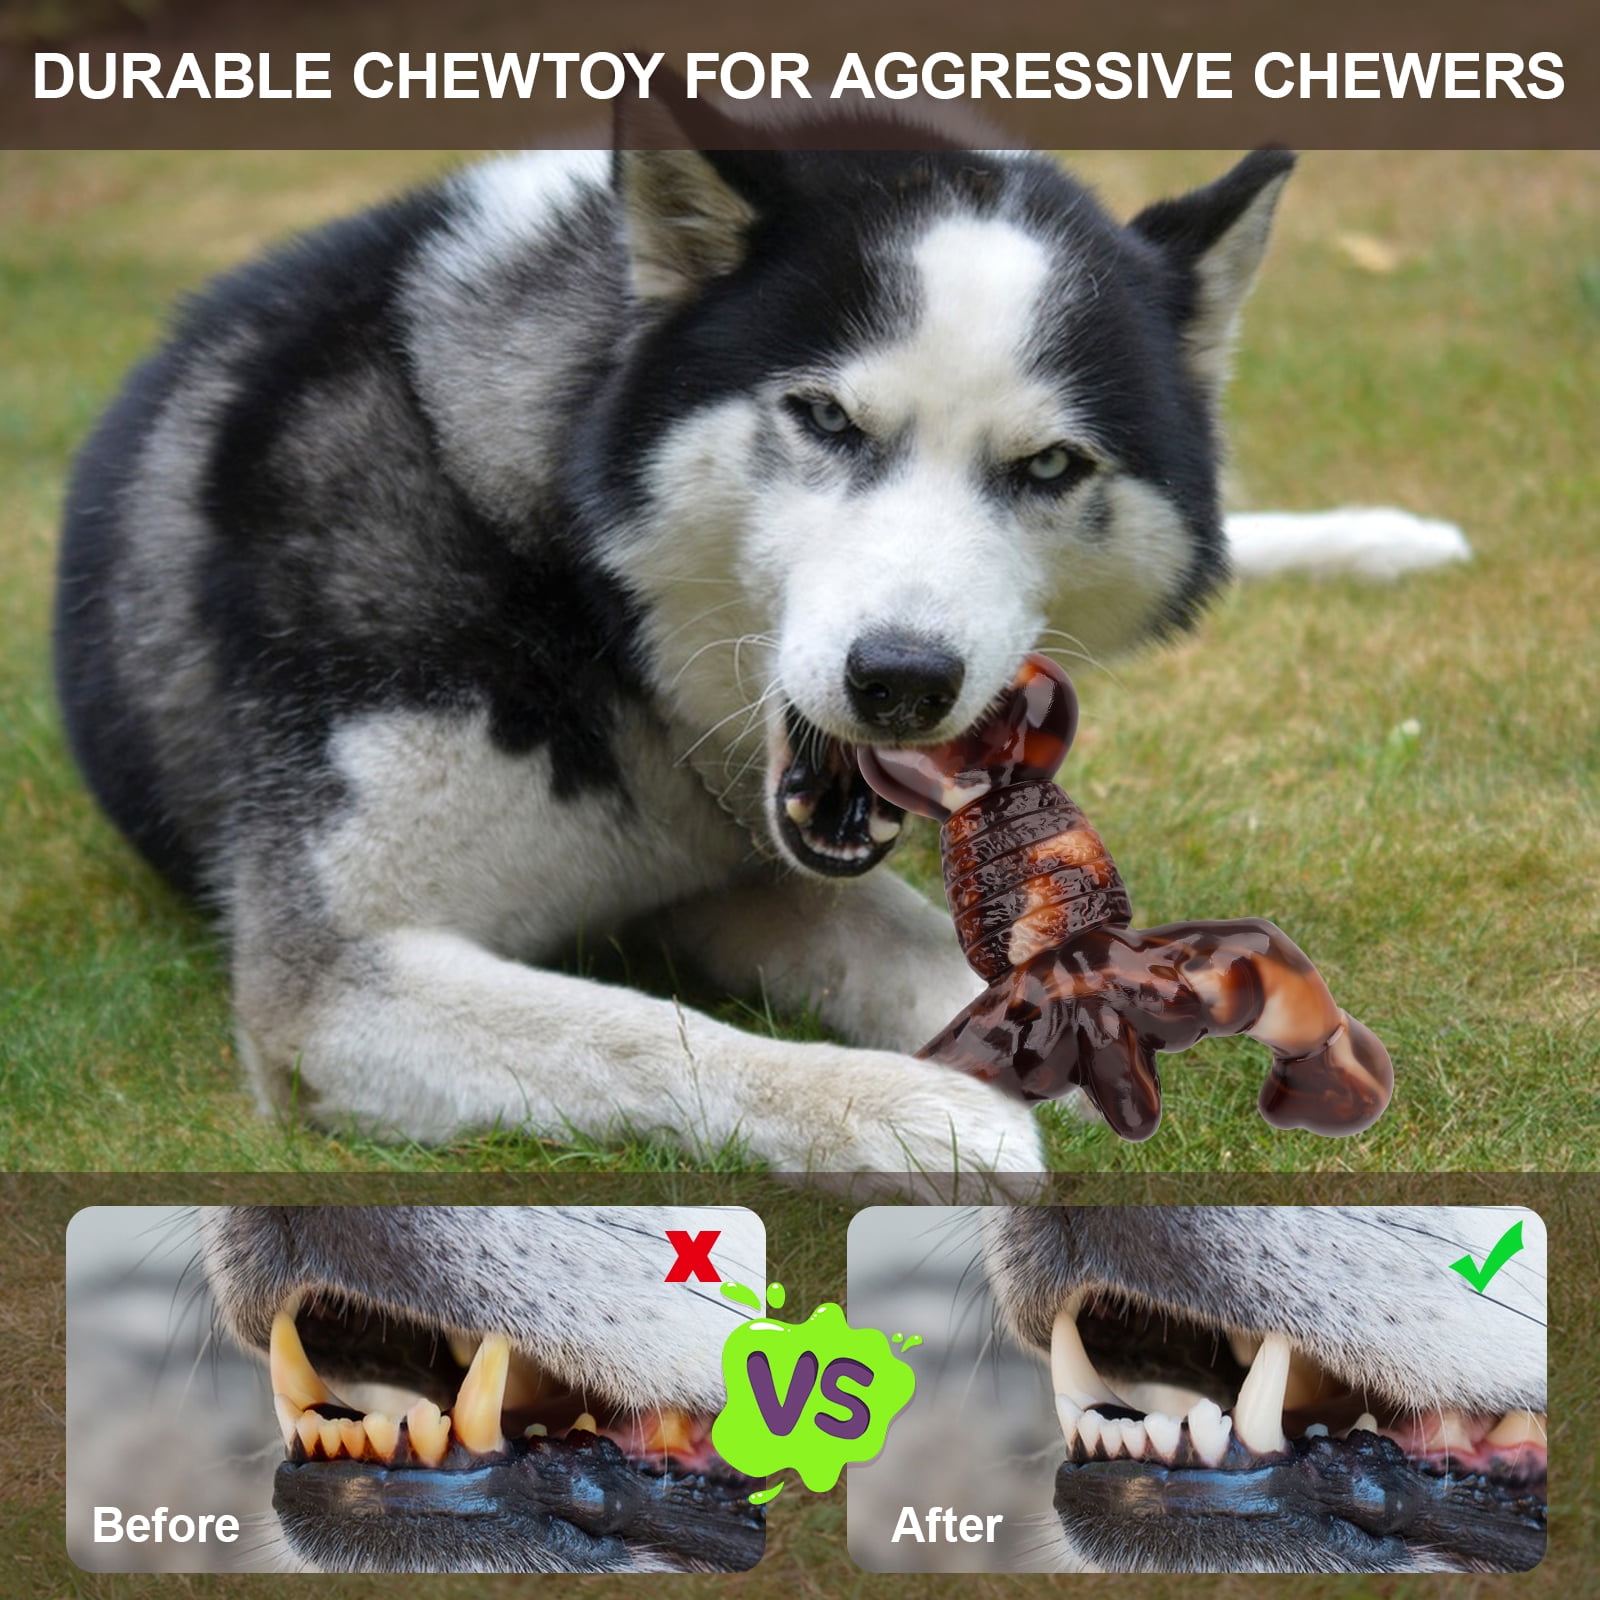 Aelflane Dog Chew Toys for Aggressive Chewers,Indestructible Dog Toy ,Tough  Nylon Double-Bone Dog Chew Toy,Bacon Flavor